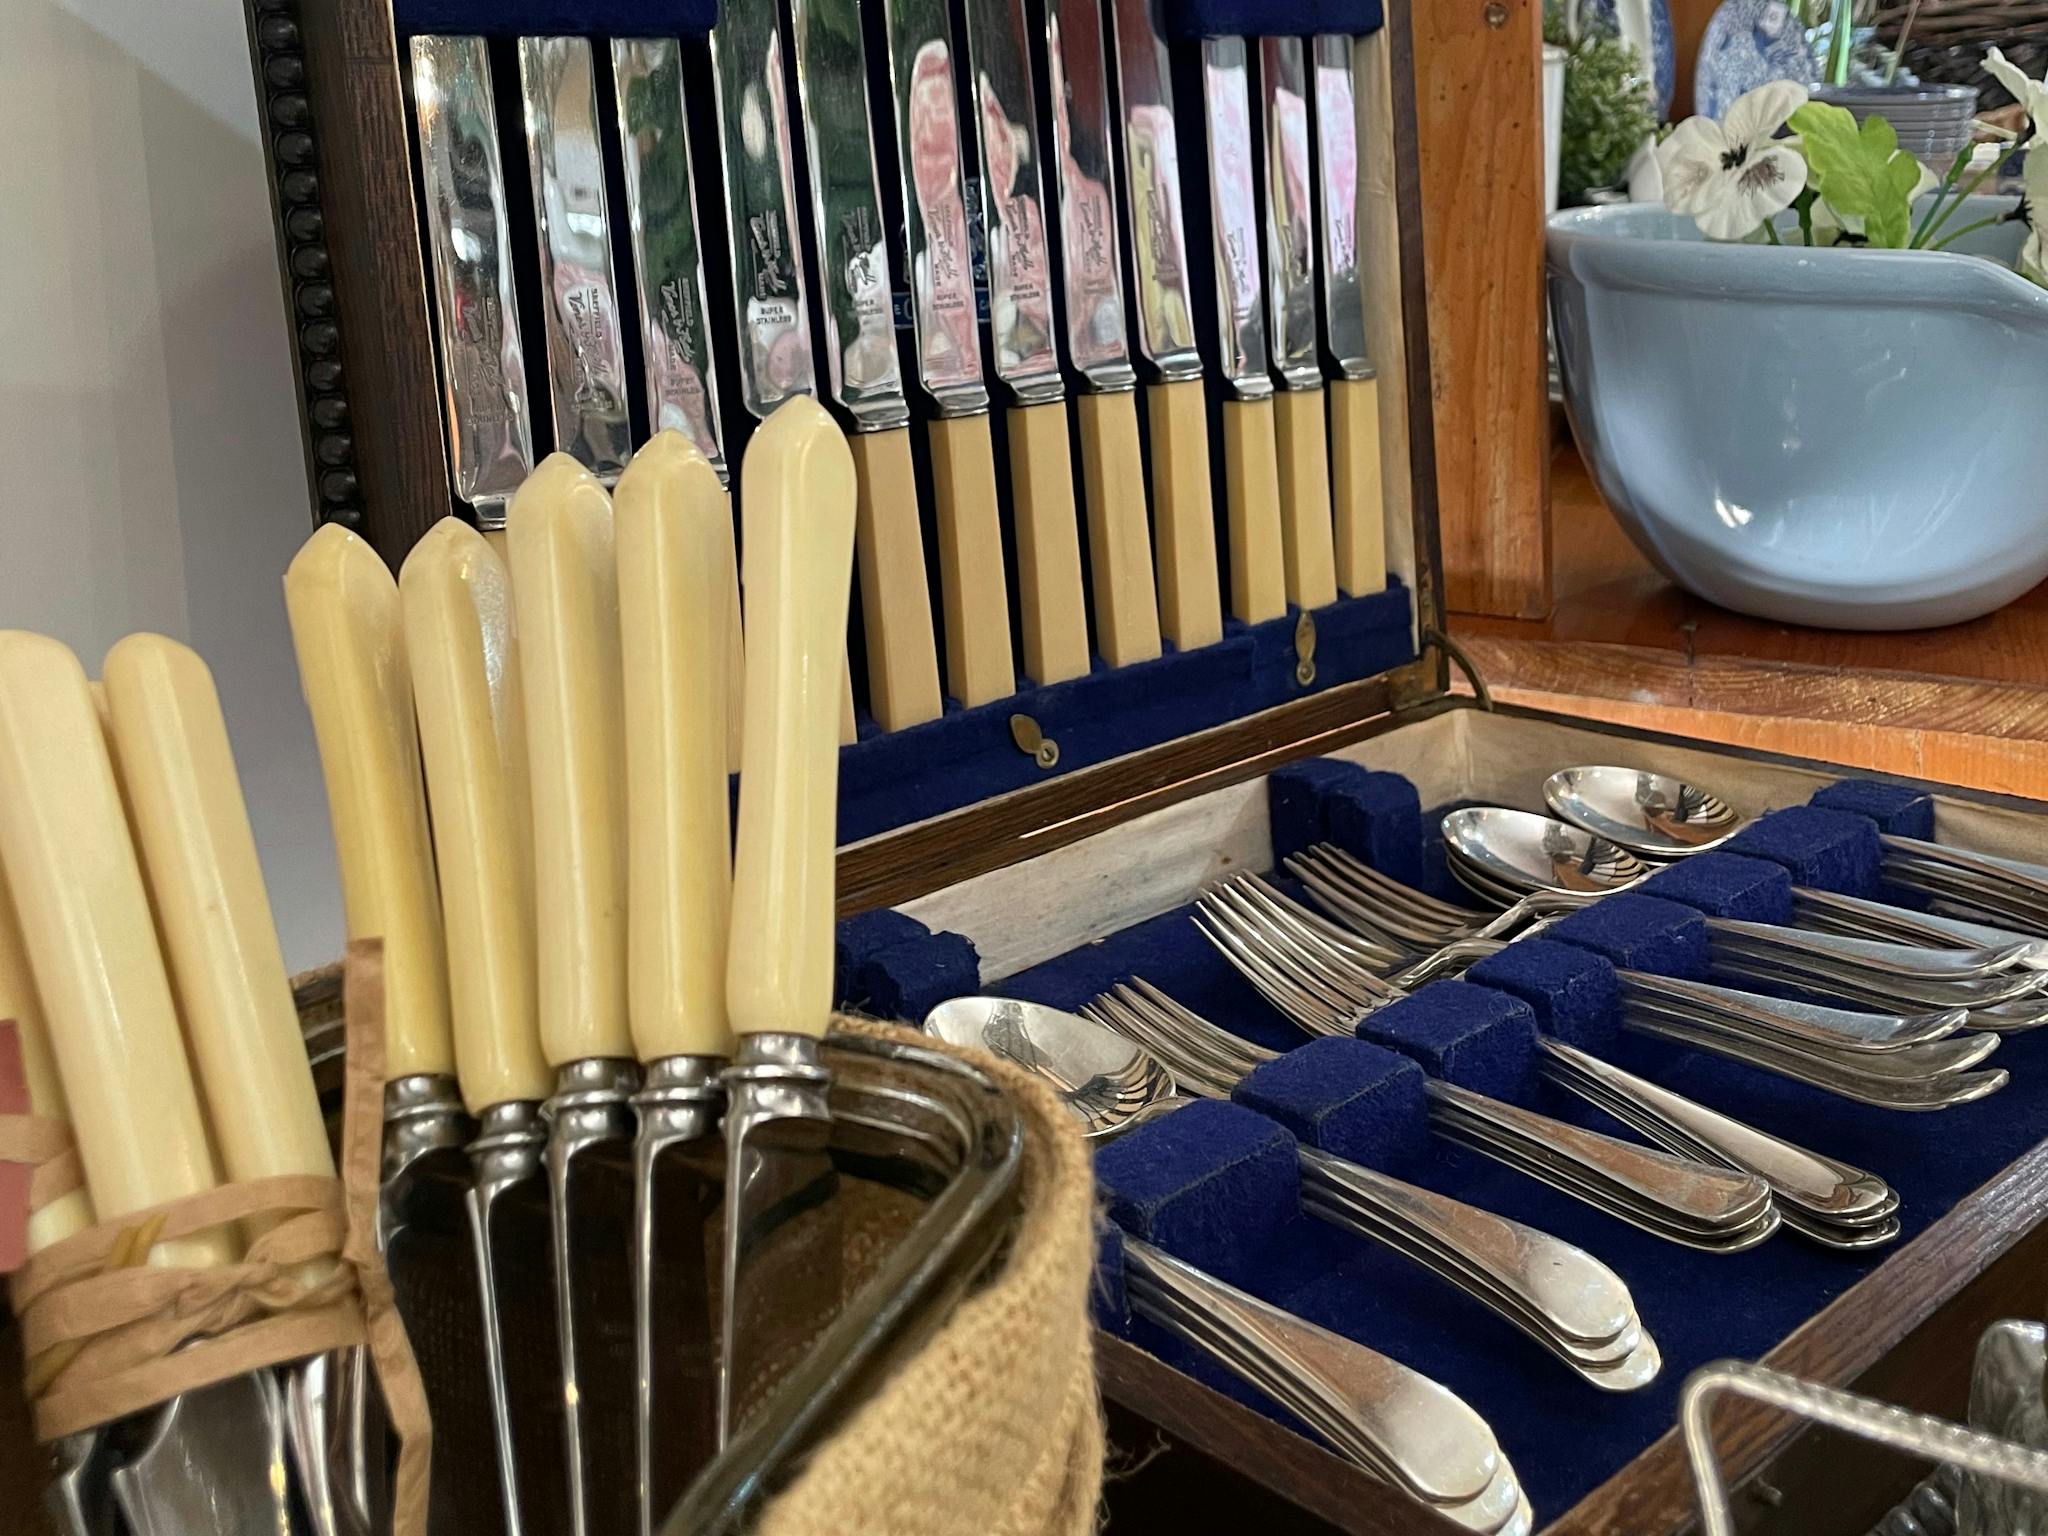 Bone handled cutlery sets in canteens and individually to choose from